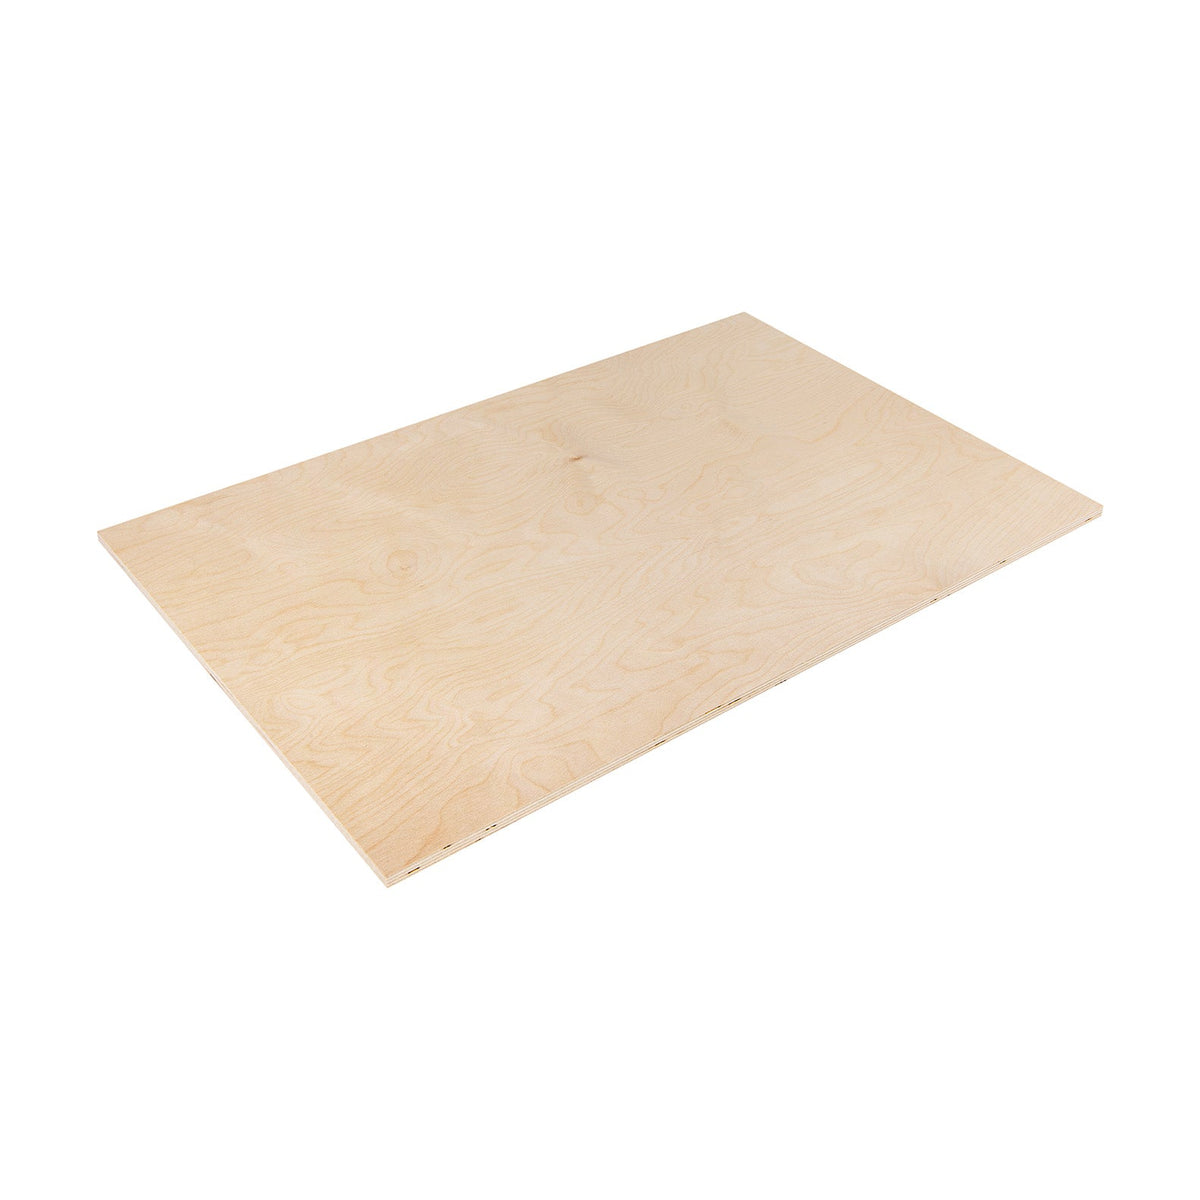 Birch wood pastry board to knead - 90x51 cm